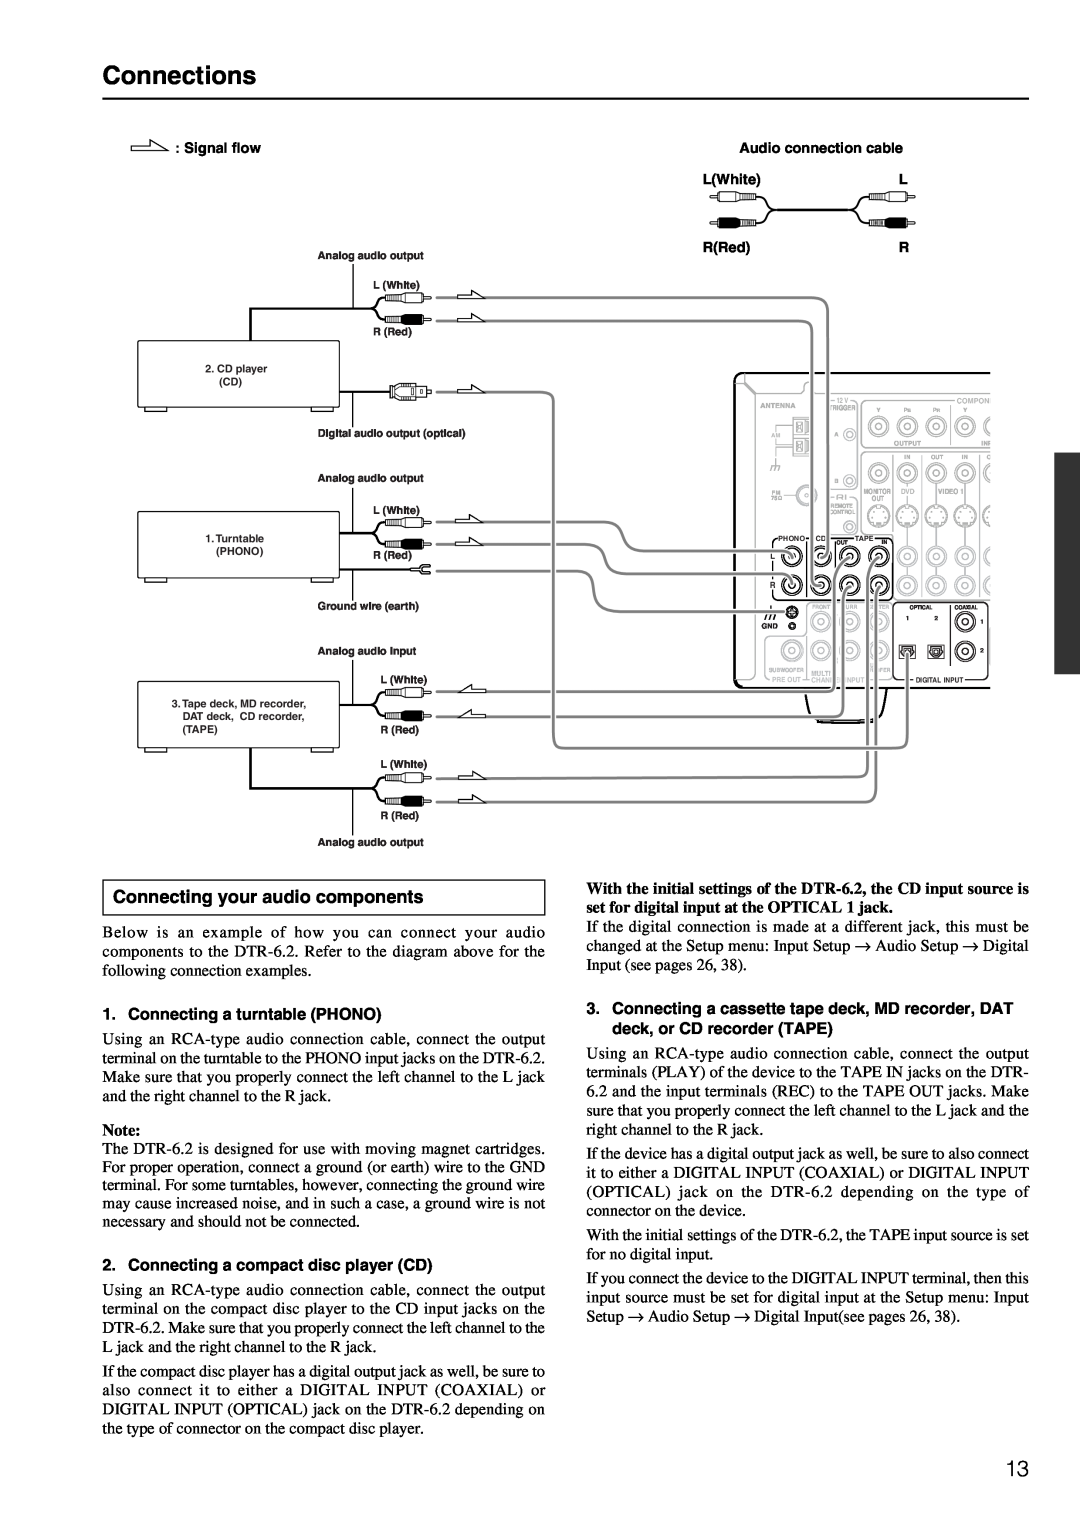 Integra DTR-6.2 instruction manual Connections, Connecting your audio components 